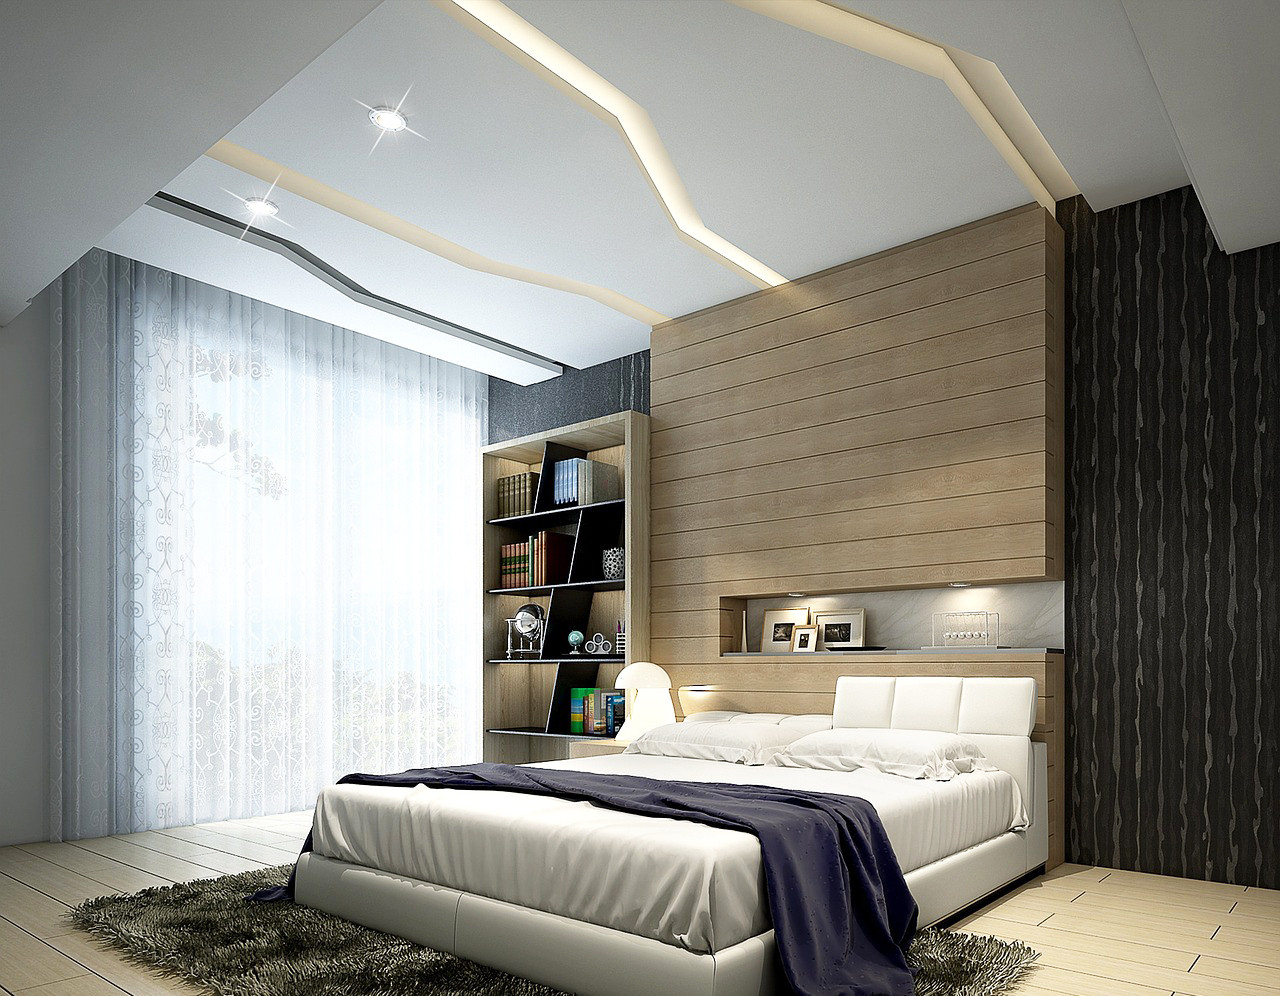 Modern Ceiling Design For Bedroom
 Bedroom Ceiling Design – Creative Choices and Features